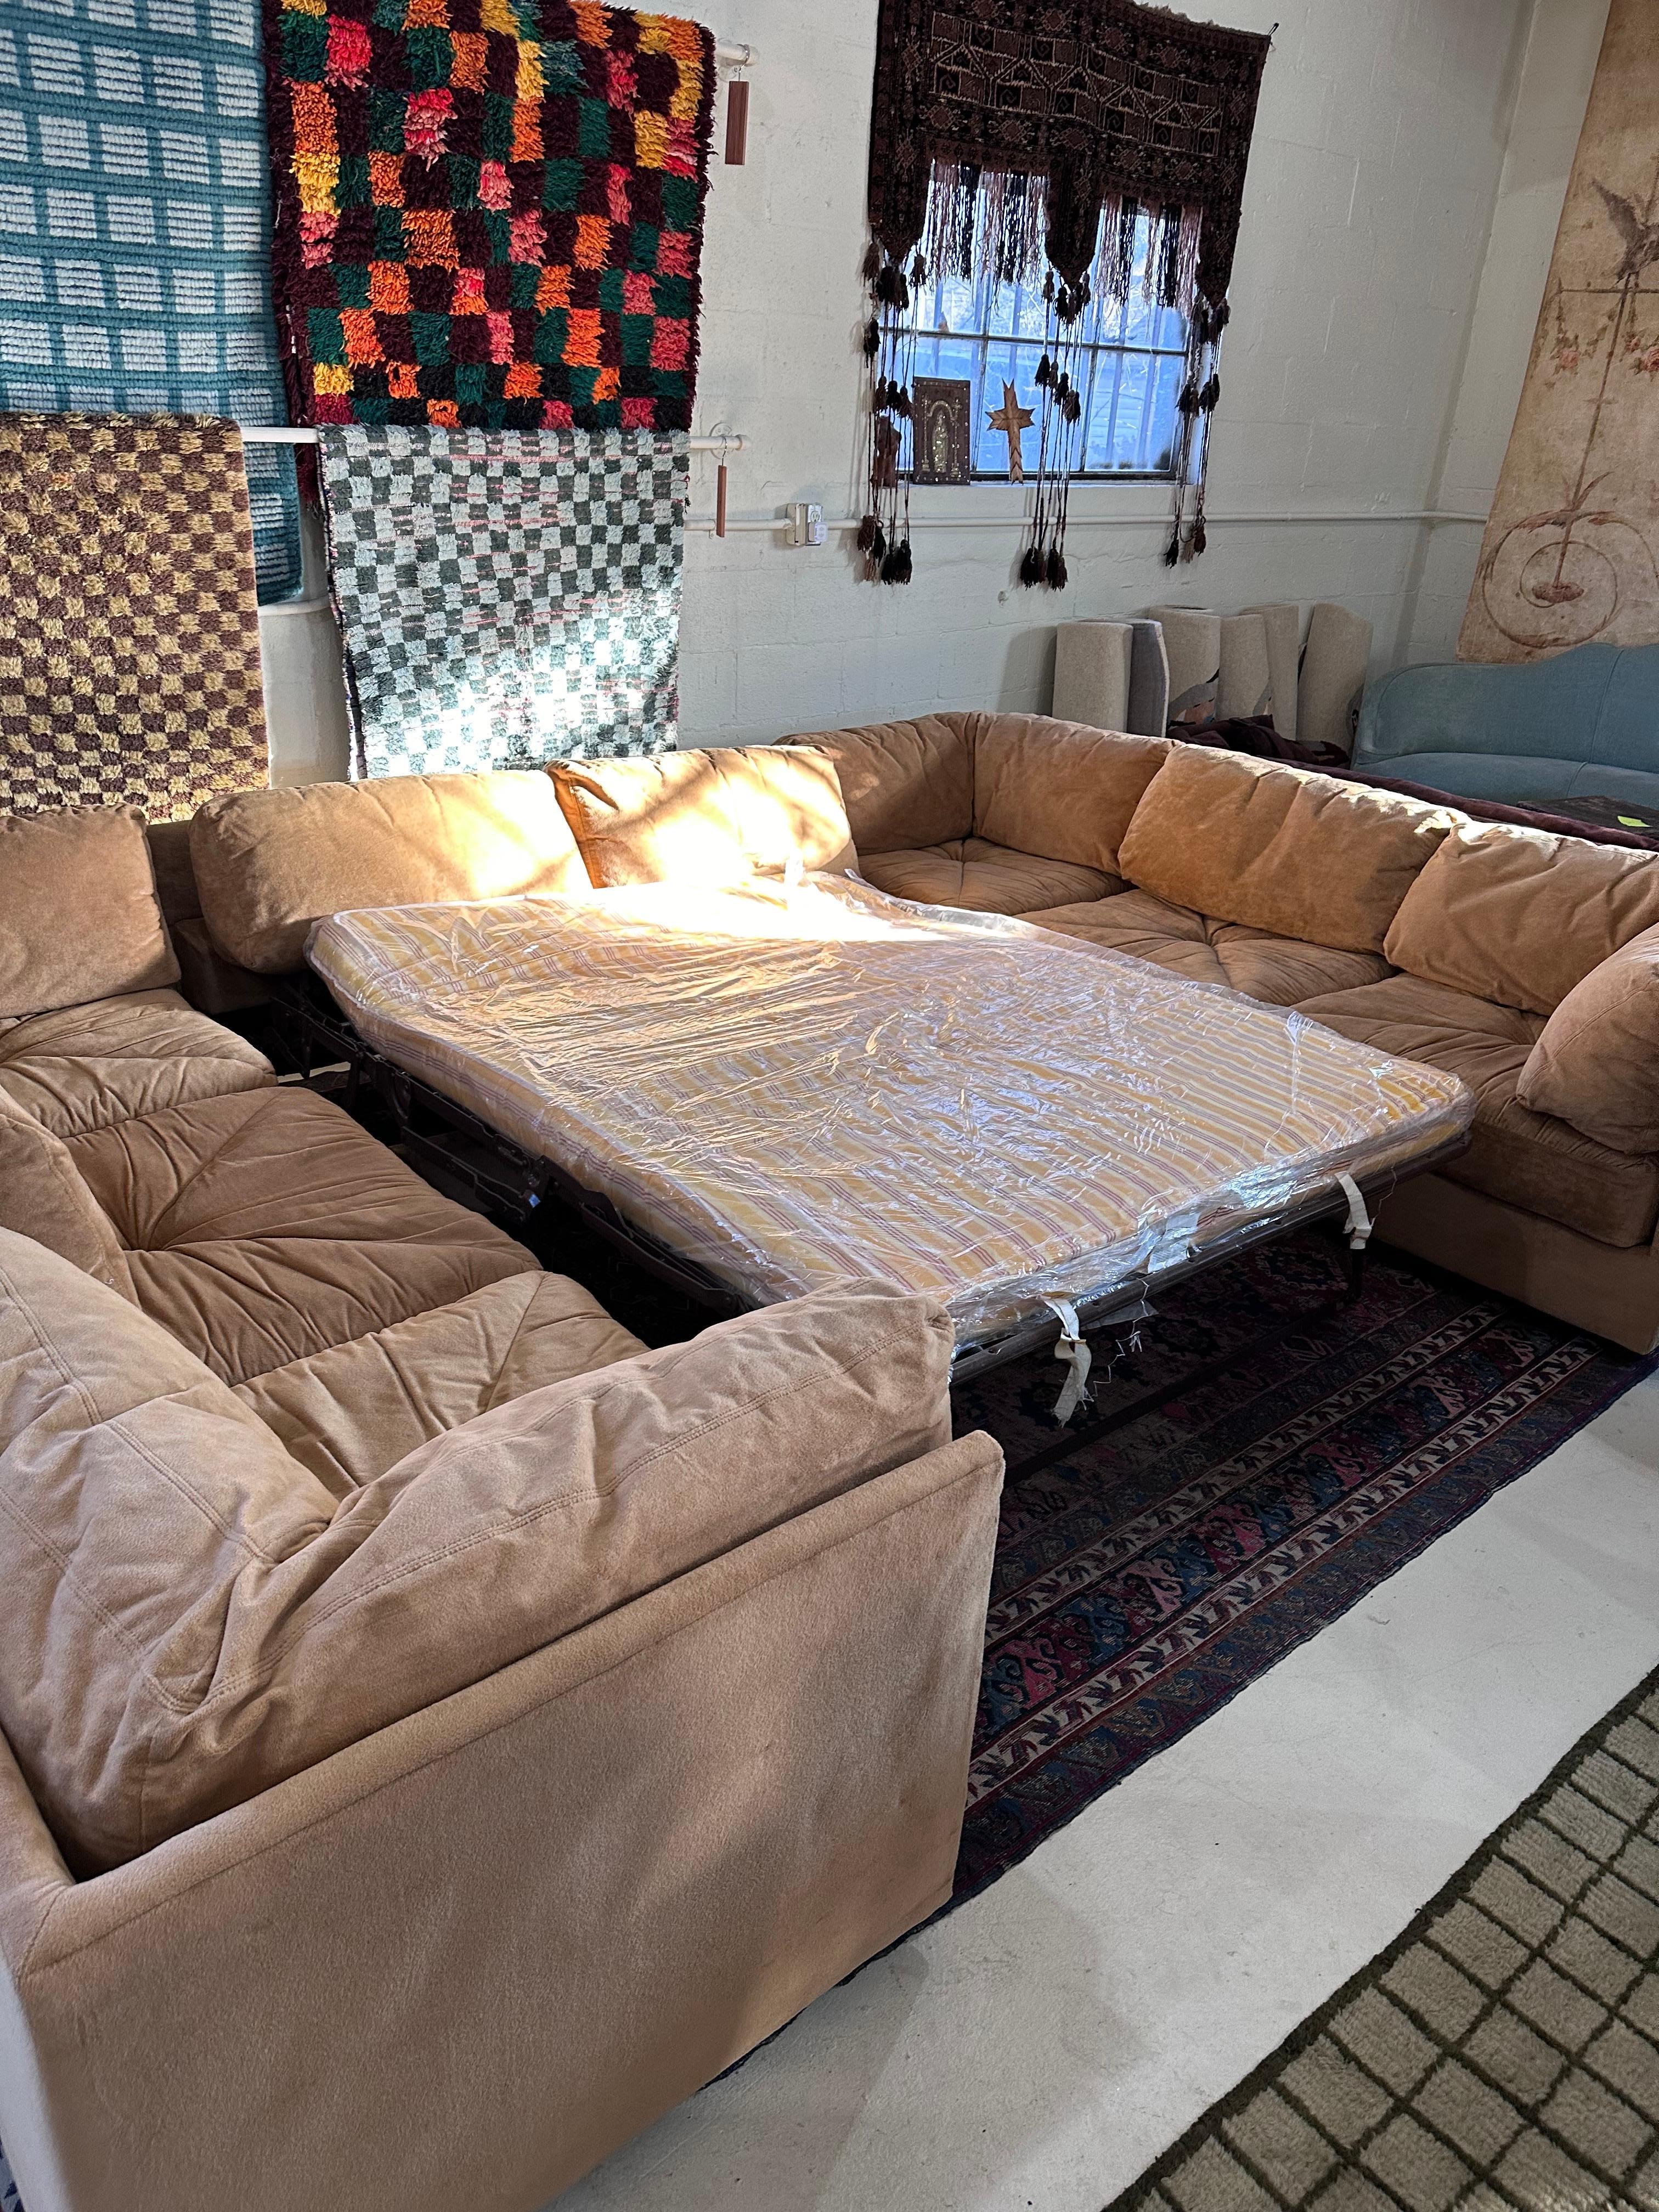 Selig Modular Conversation Pit Sofa In Good Condition For Sale In Nashville, TN